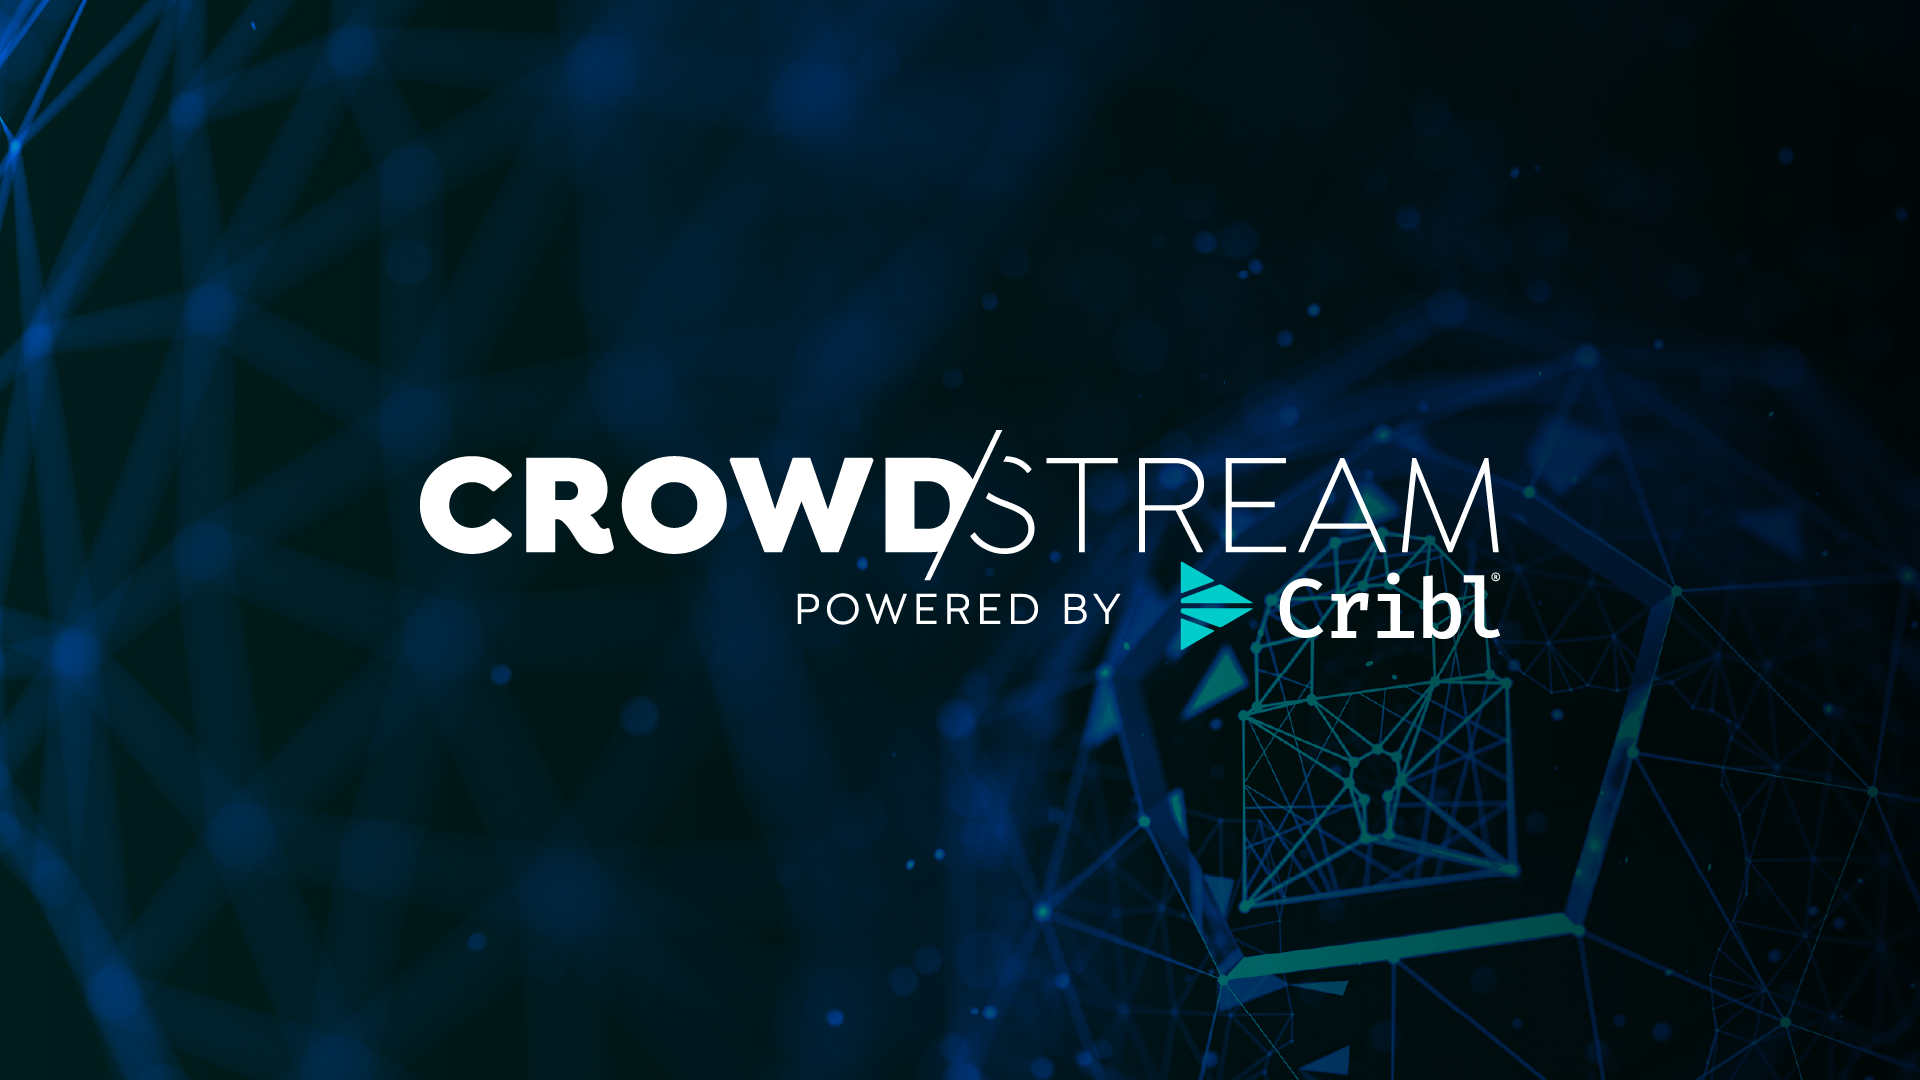 CrowdStream Powered by Cribl